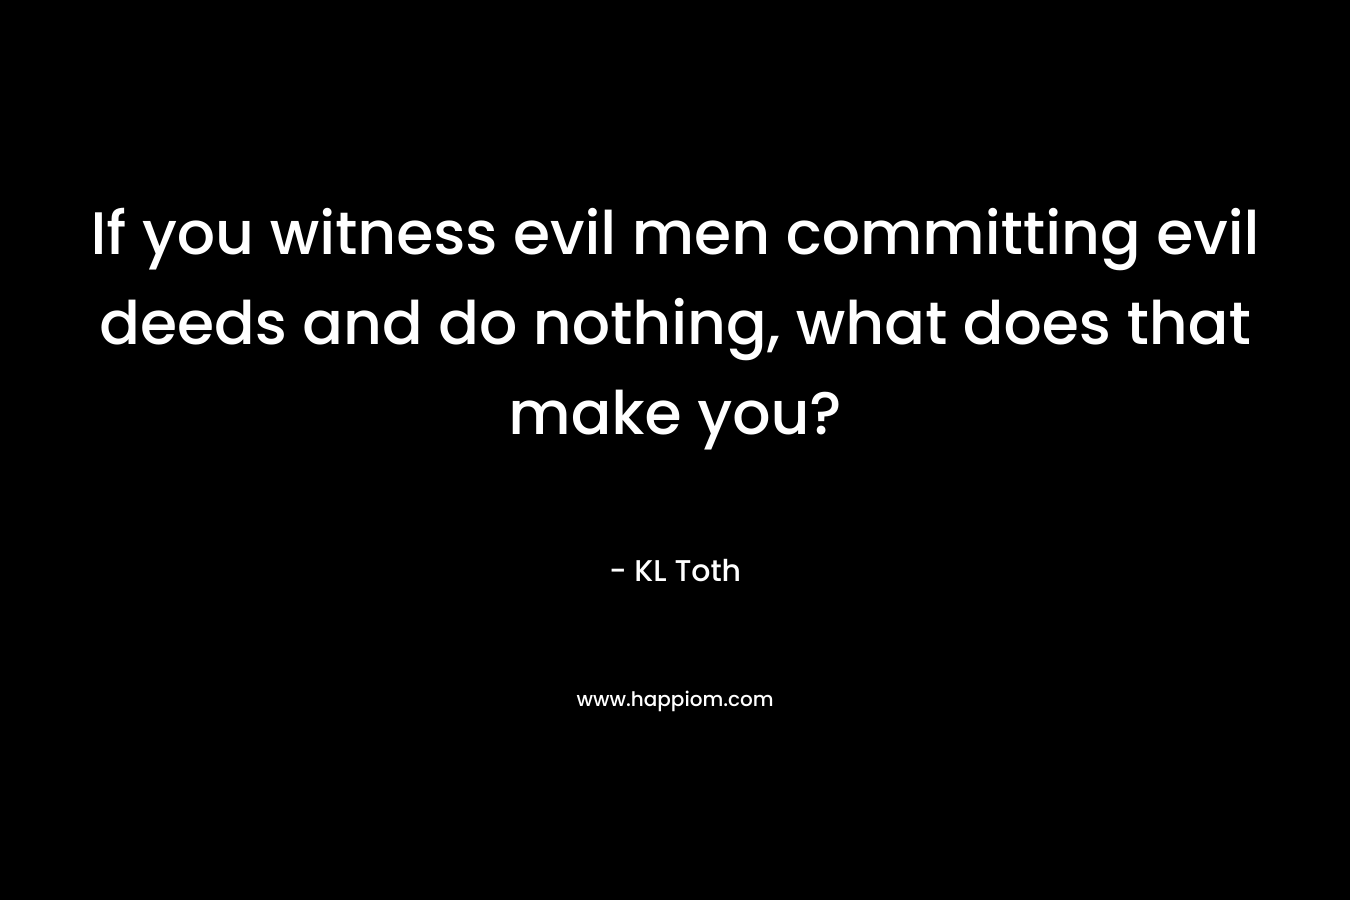 If you witness evil men committing evil deeds and do nothing, what does that make you? – KL Toth